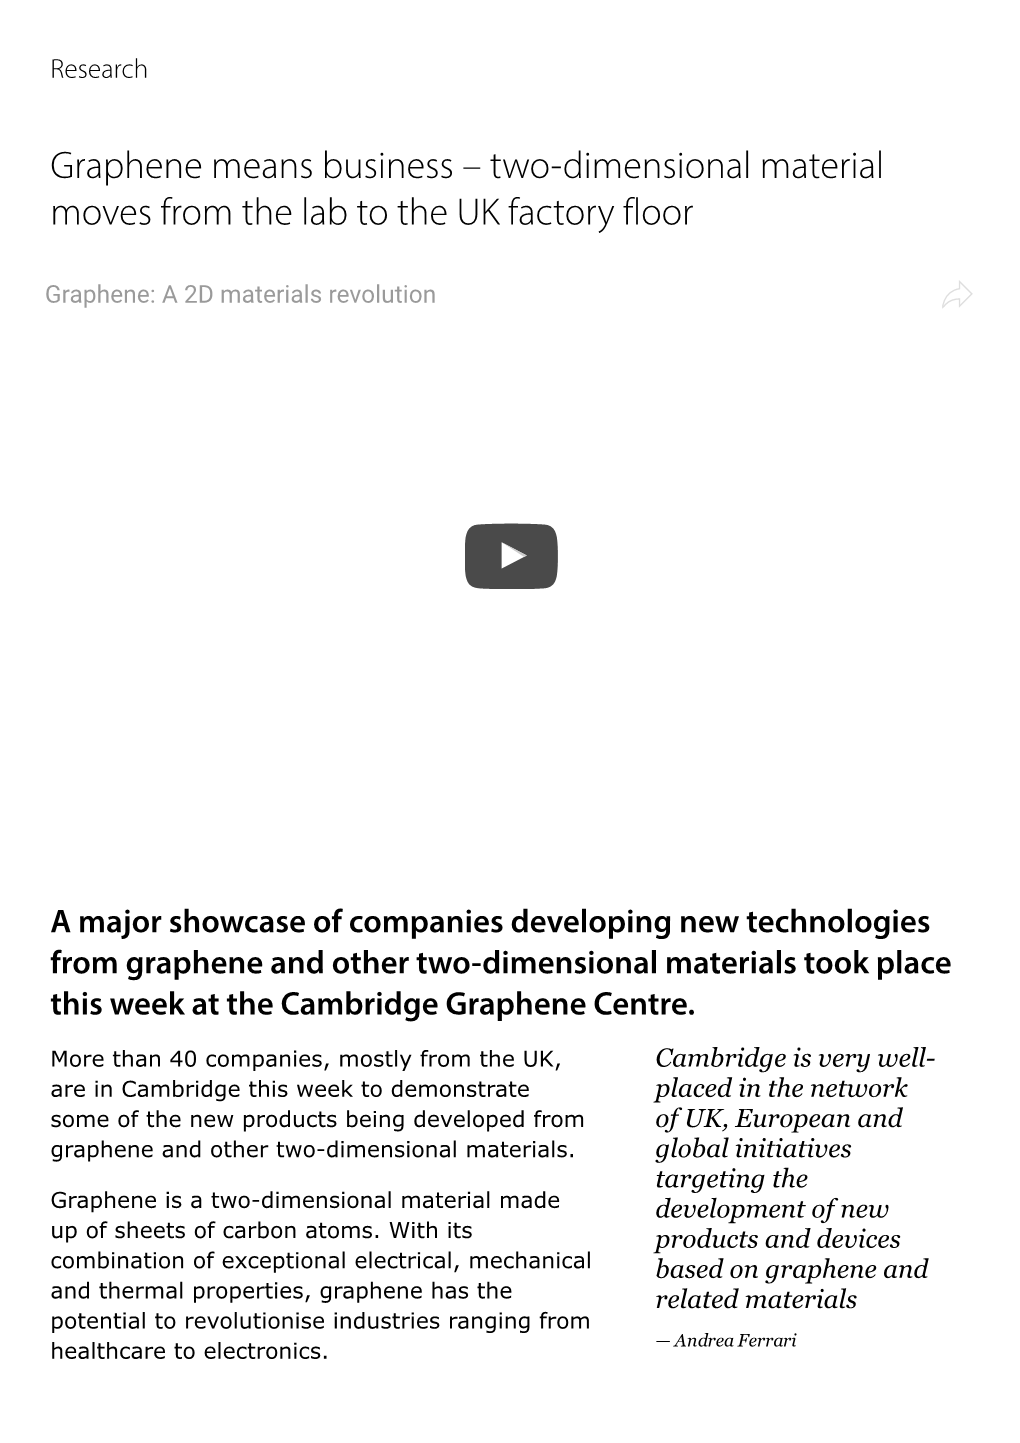 Graphene Means Business – Two-Dimensional Material Moves from the Lab to the UK Factory Floor